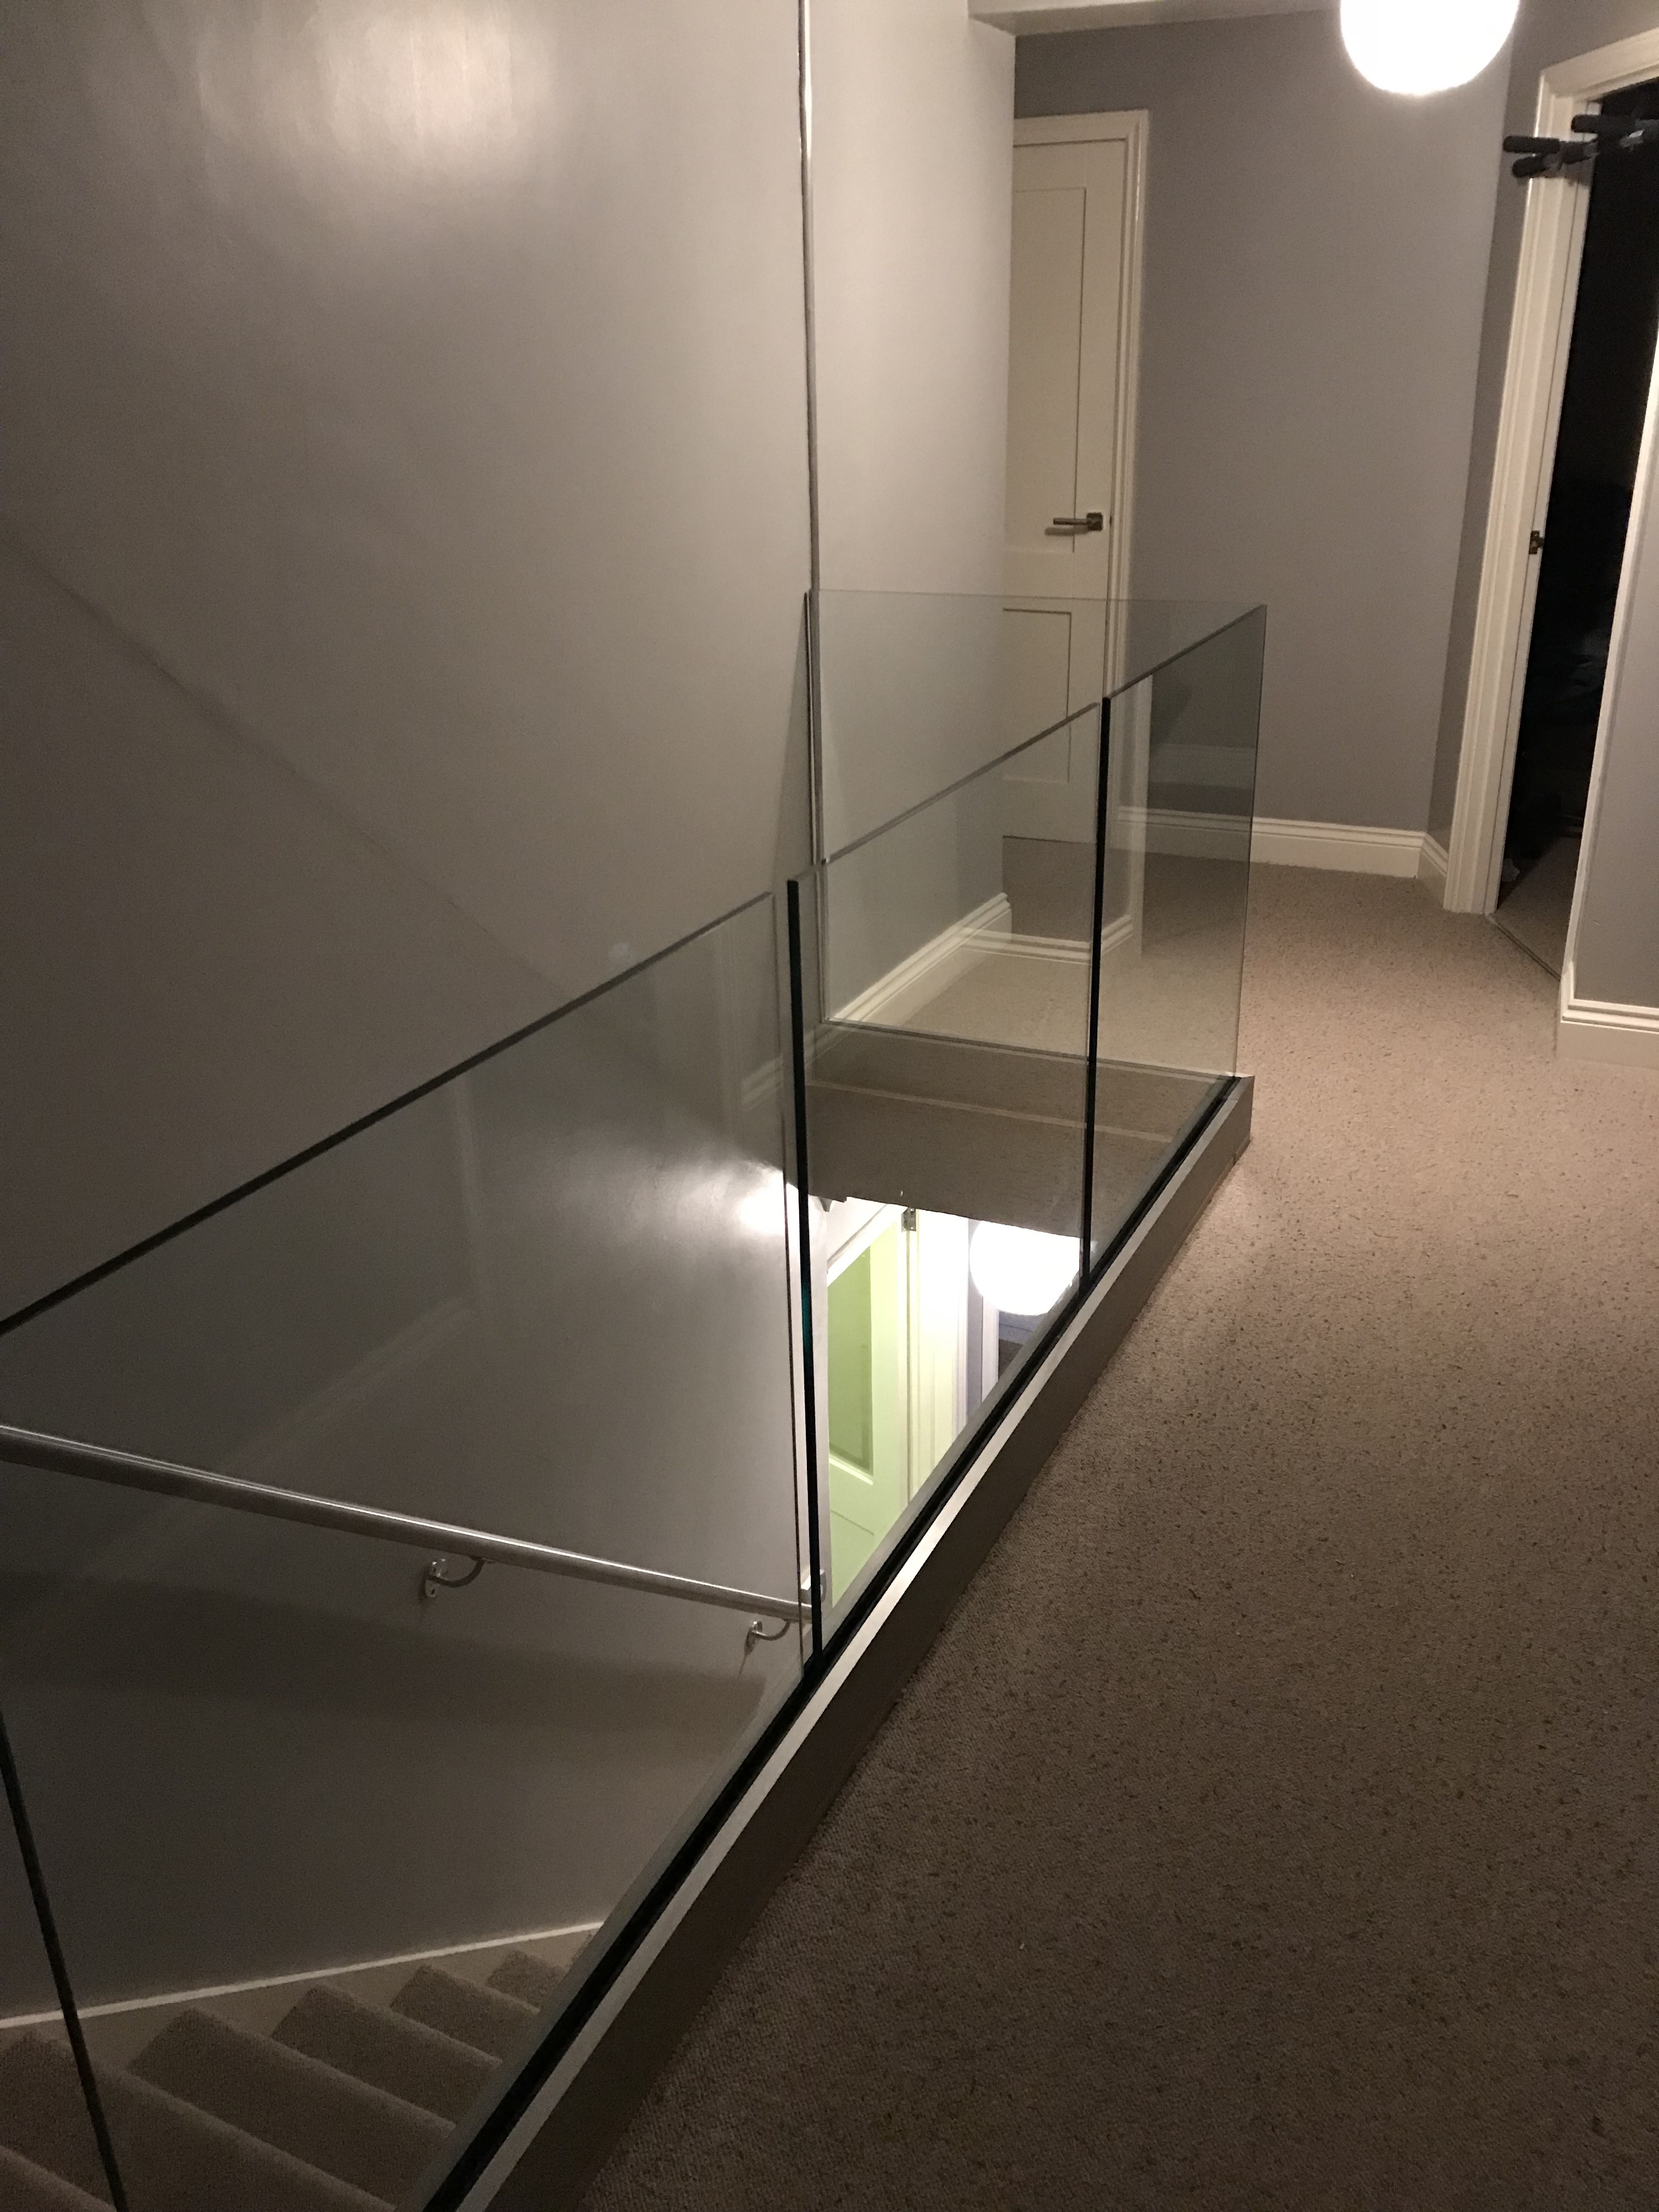 Infinity glass balustrade installed in this landing area in London